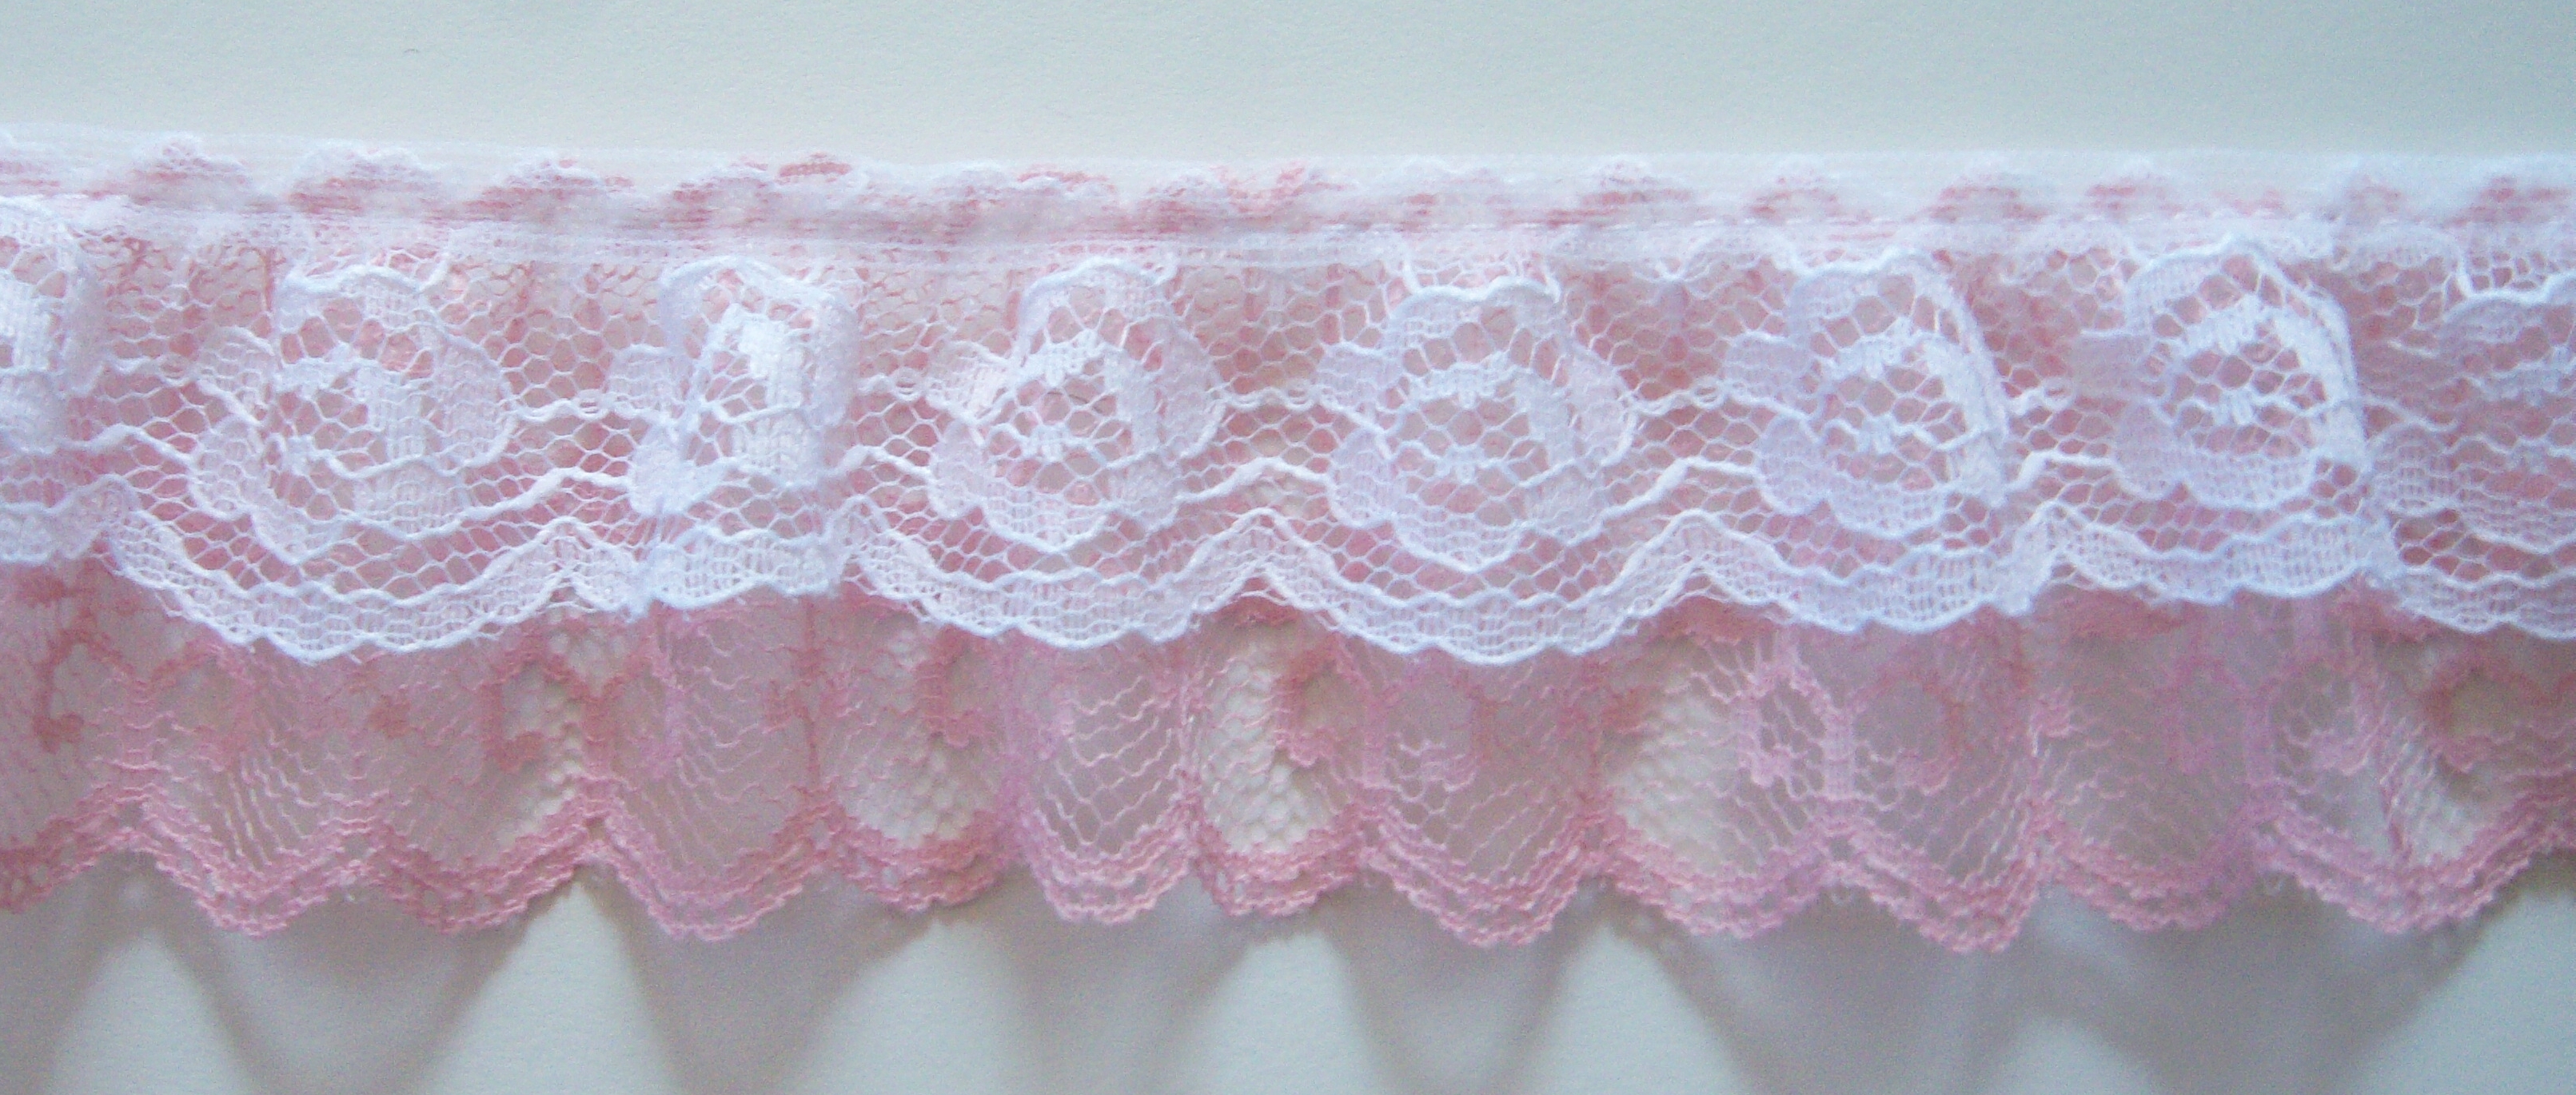 White/Lt. Rose 1 1/2" Double Gathered Lace